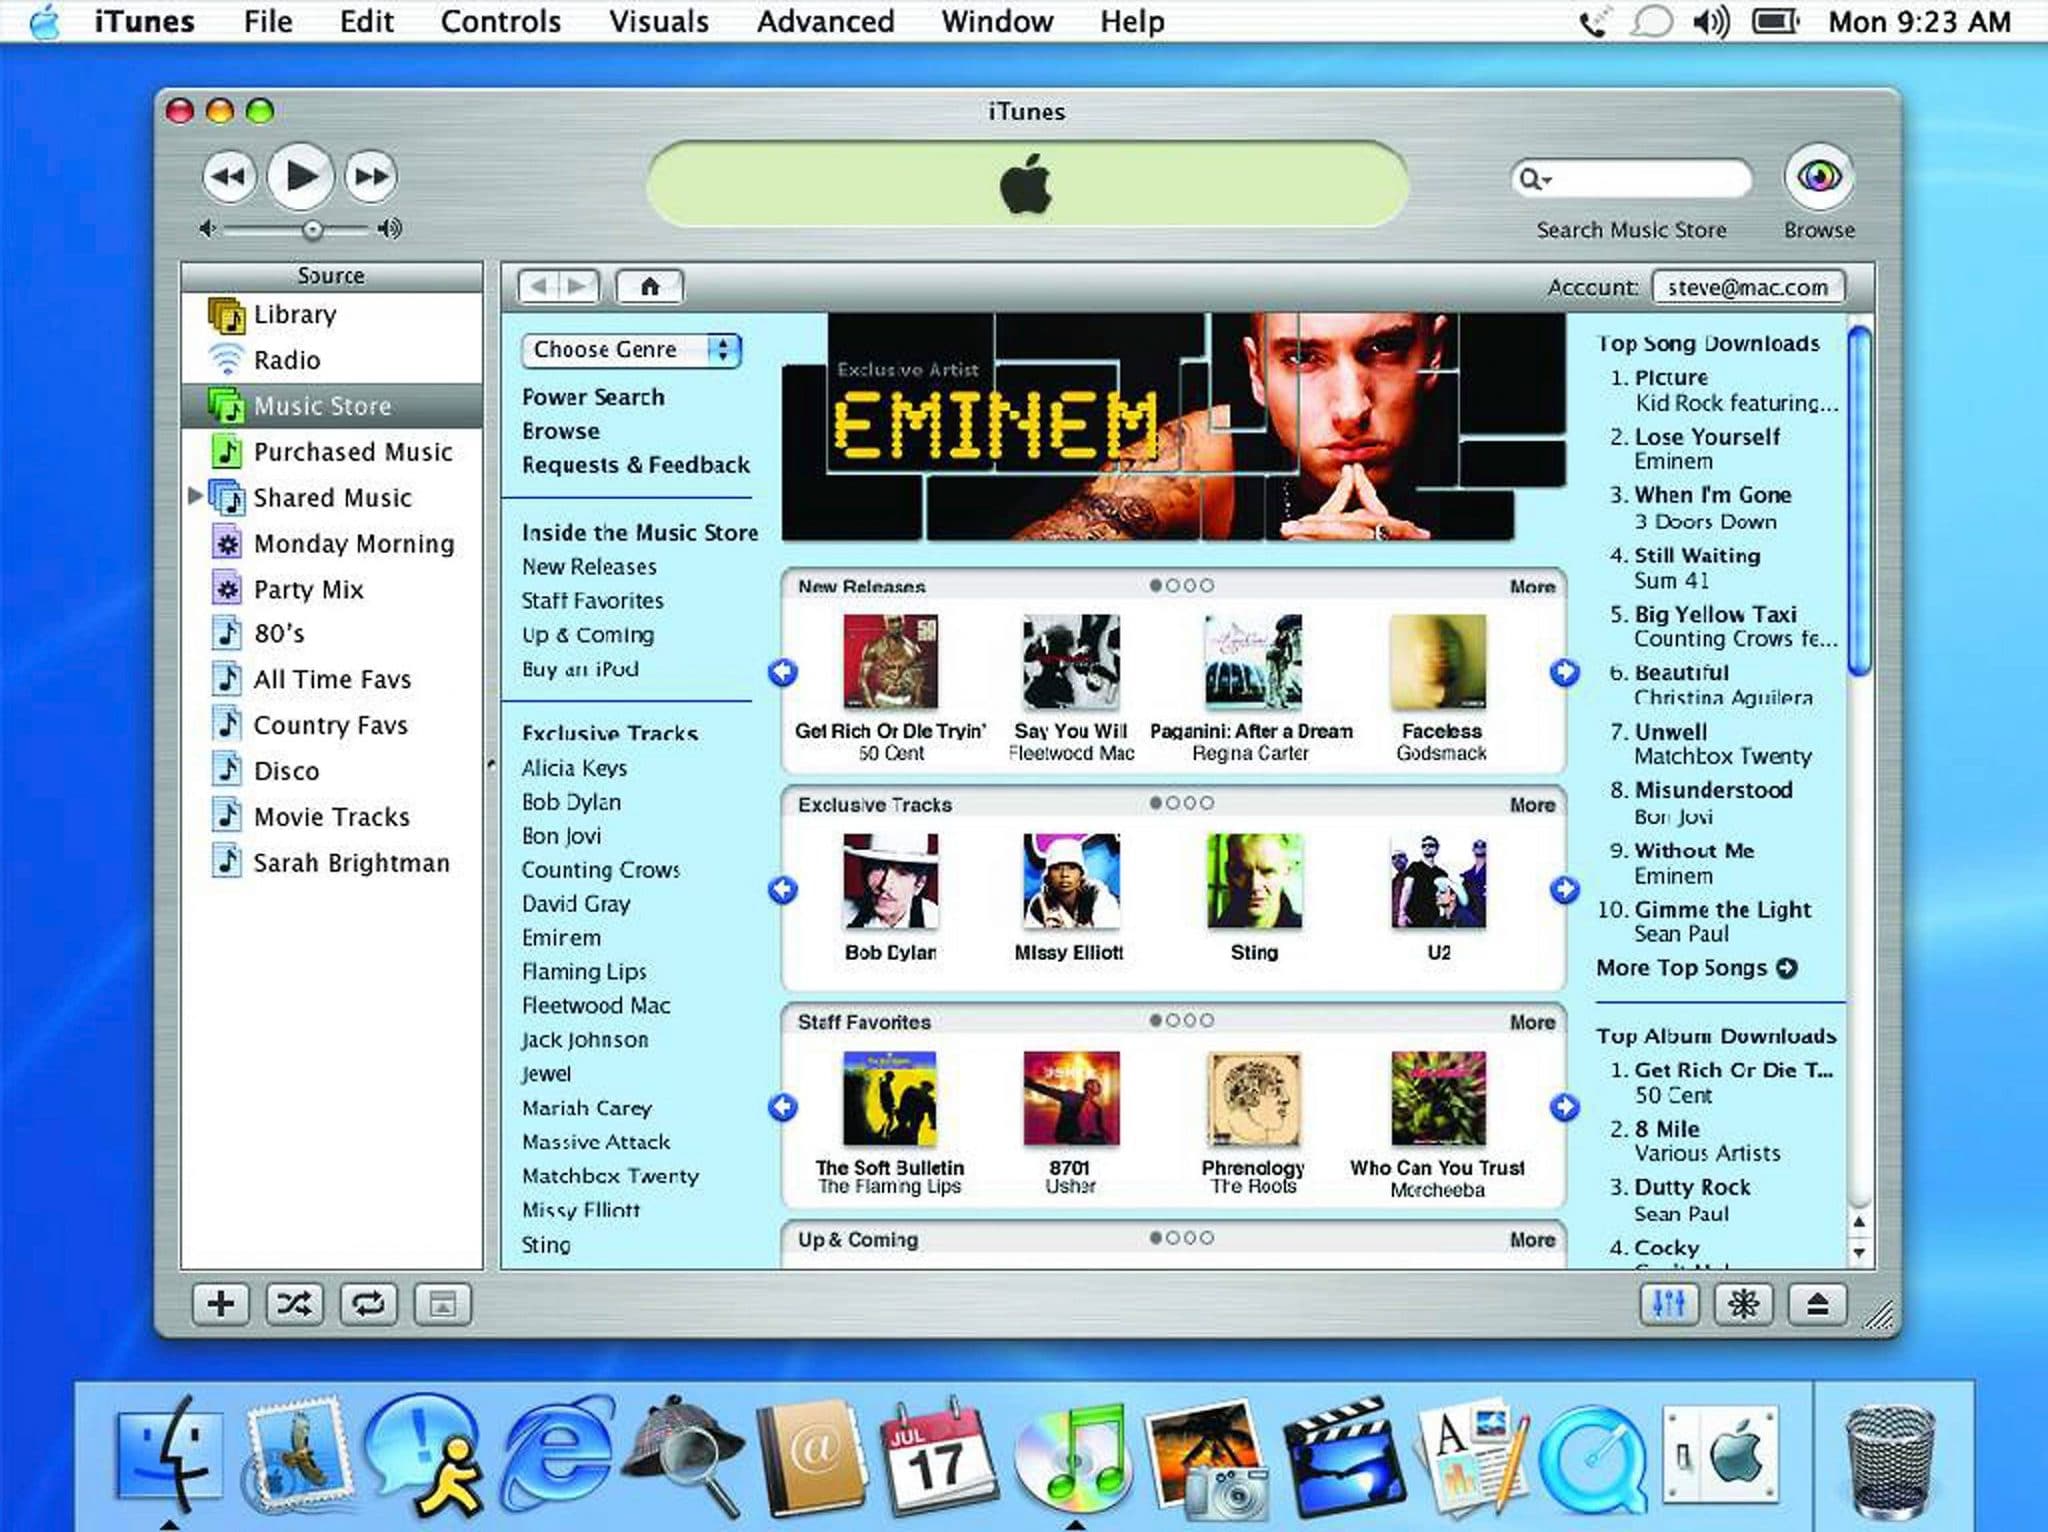 Apple Announces iTunes Music Store Debut and New iPods (2003)